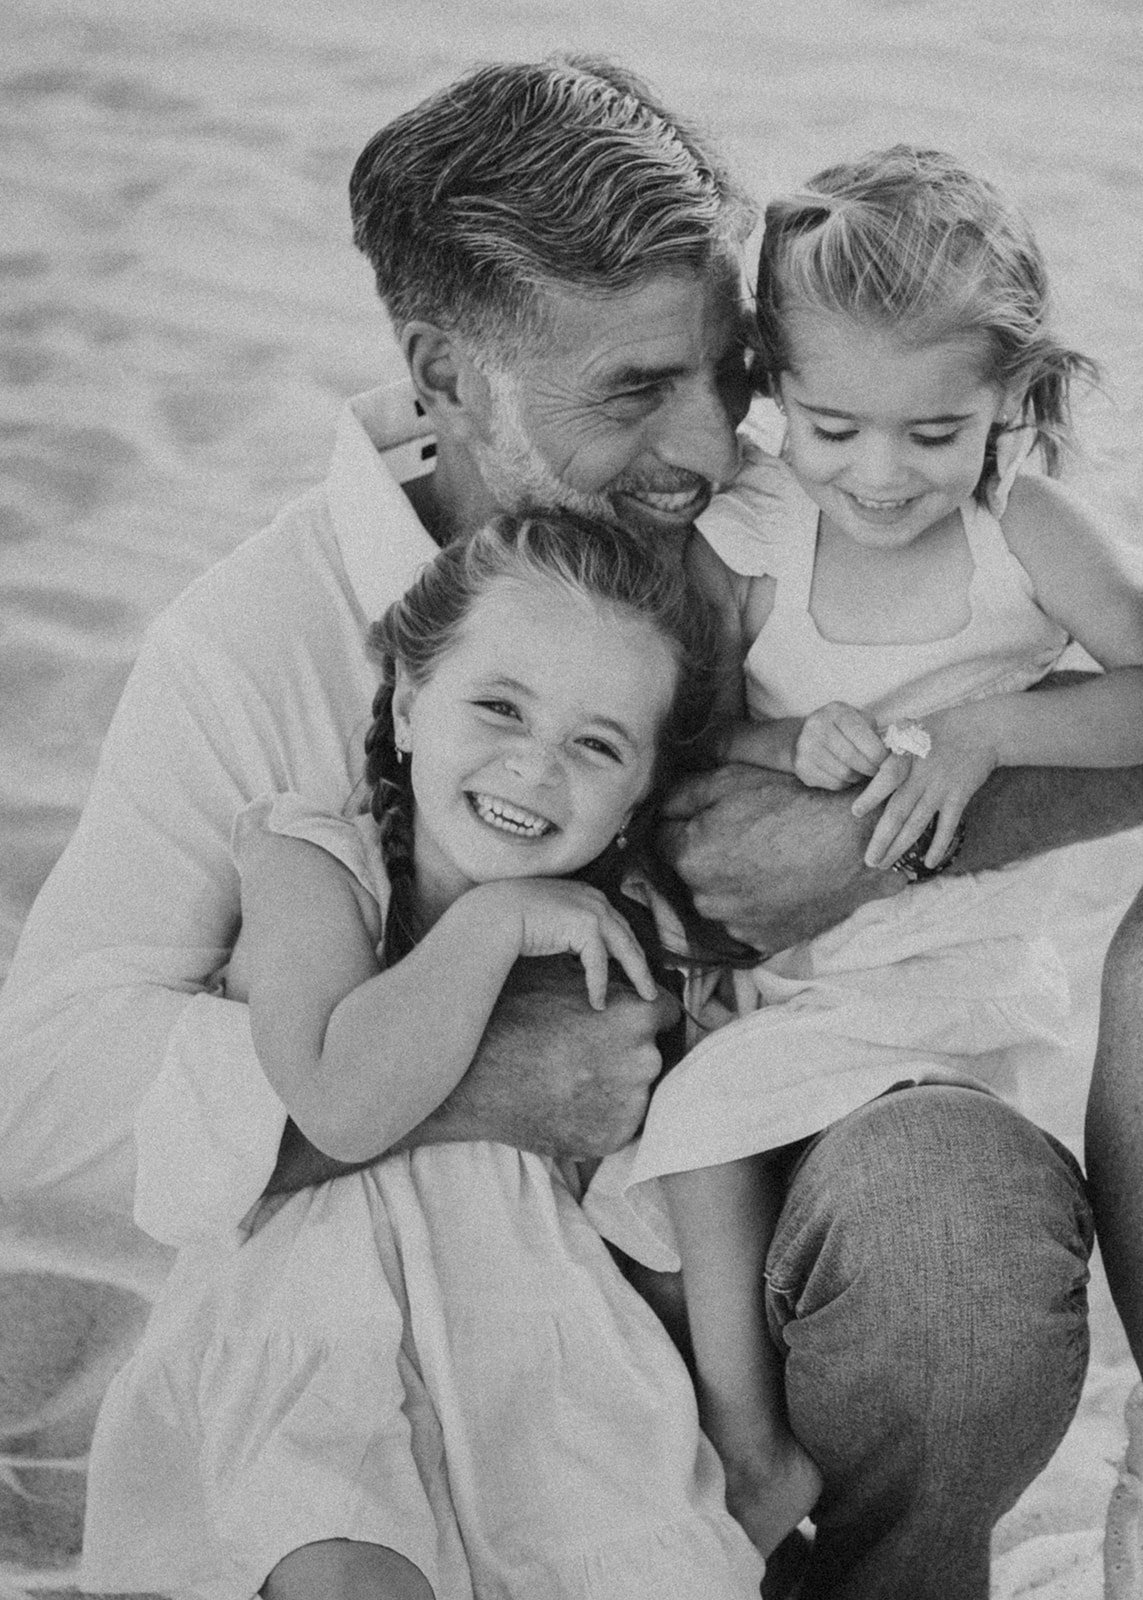 Father sat in sand on the beach, holding two young grandaughters as they smile at camera.